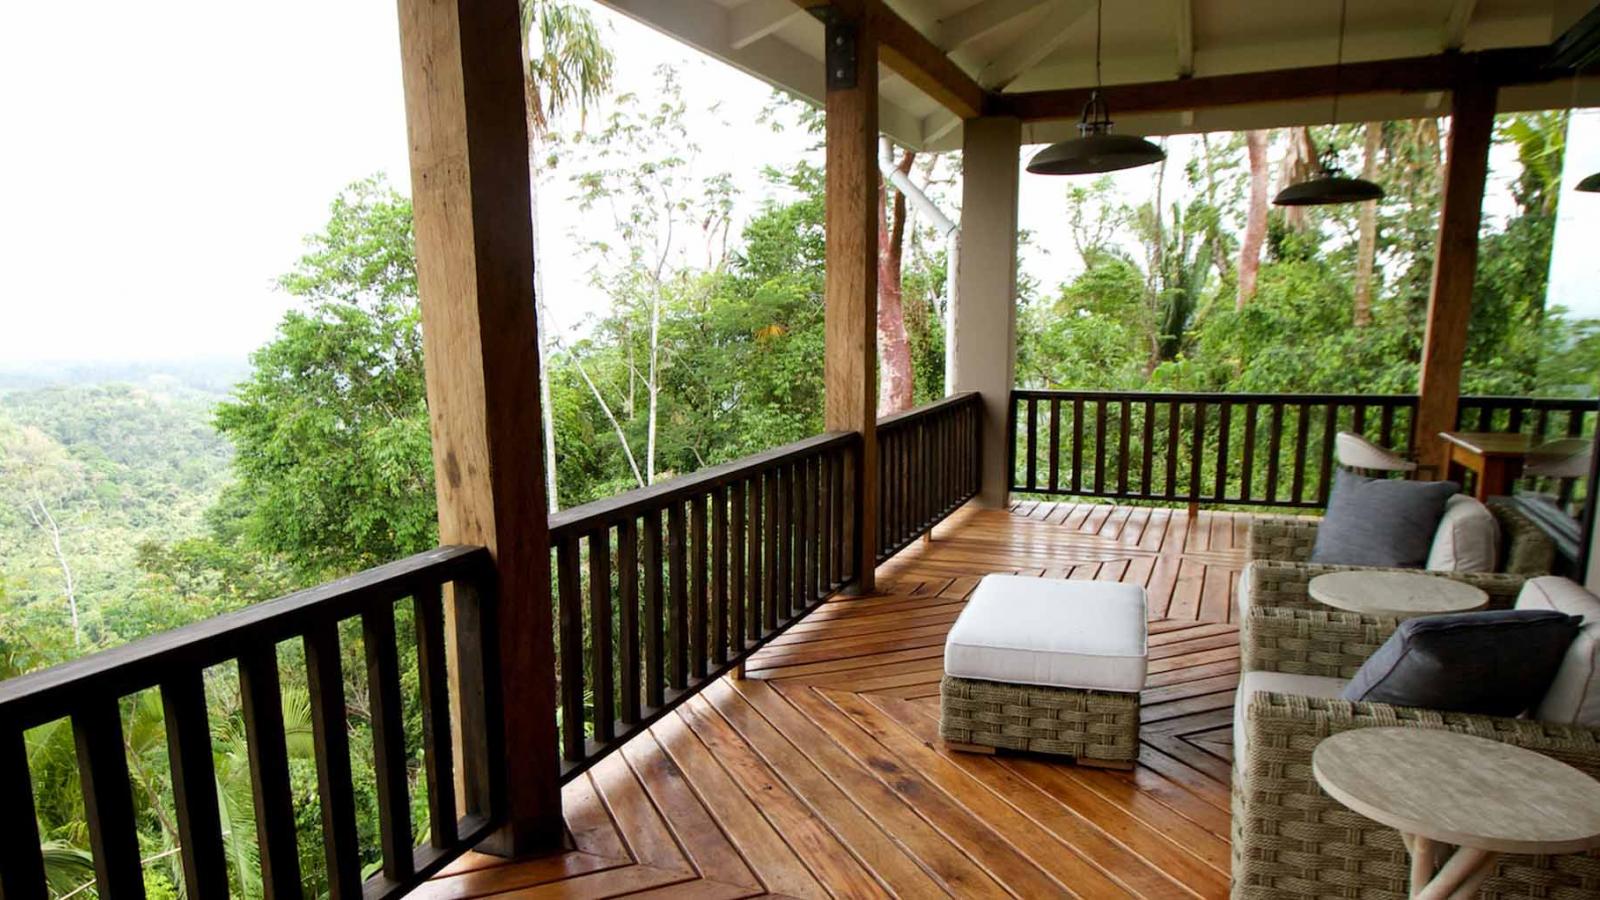 Our Stay at Copal Tree Lodge, Belize